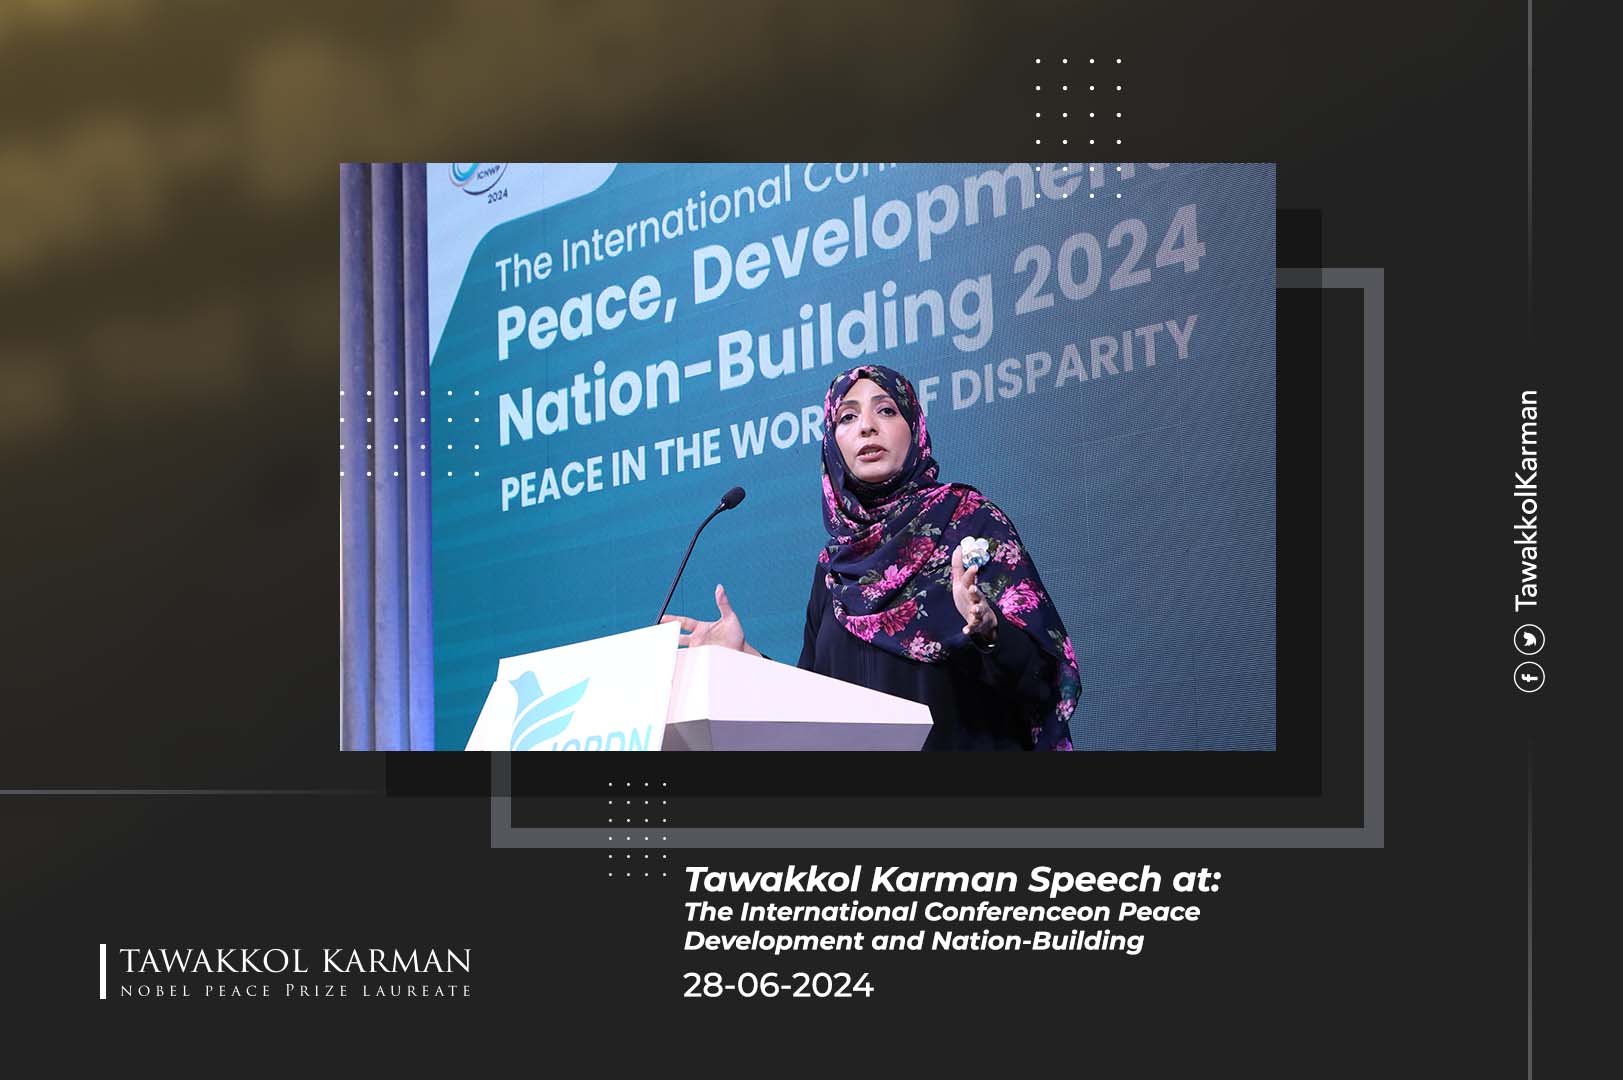 Tawakkol Karman Speech at: The International Conferenceon Peace Development and Nation-Building